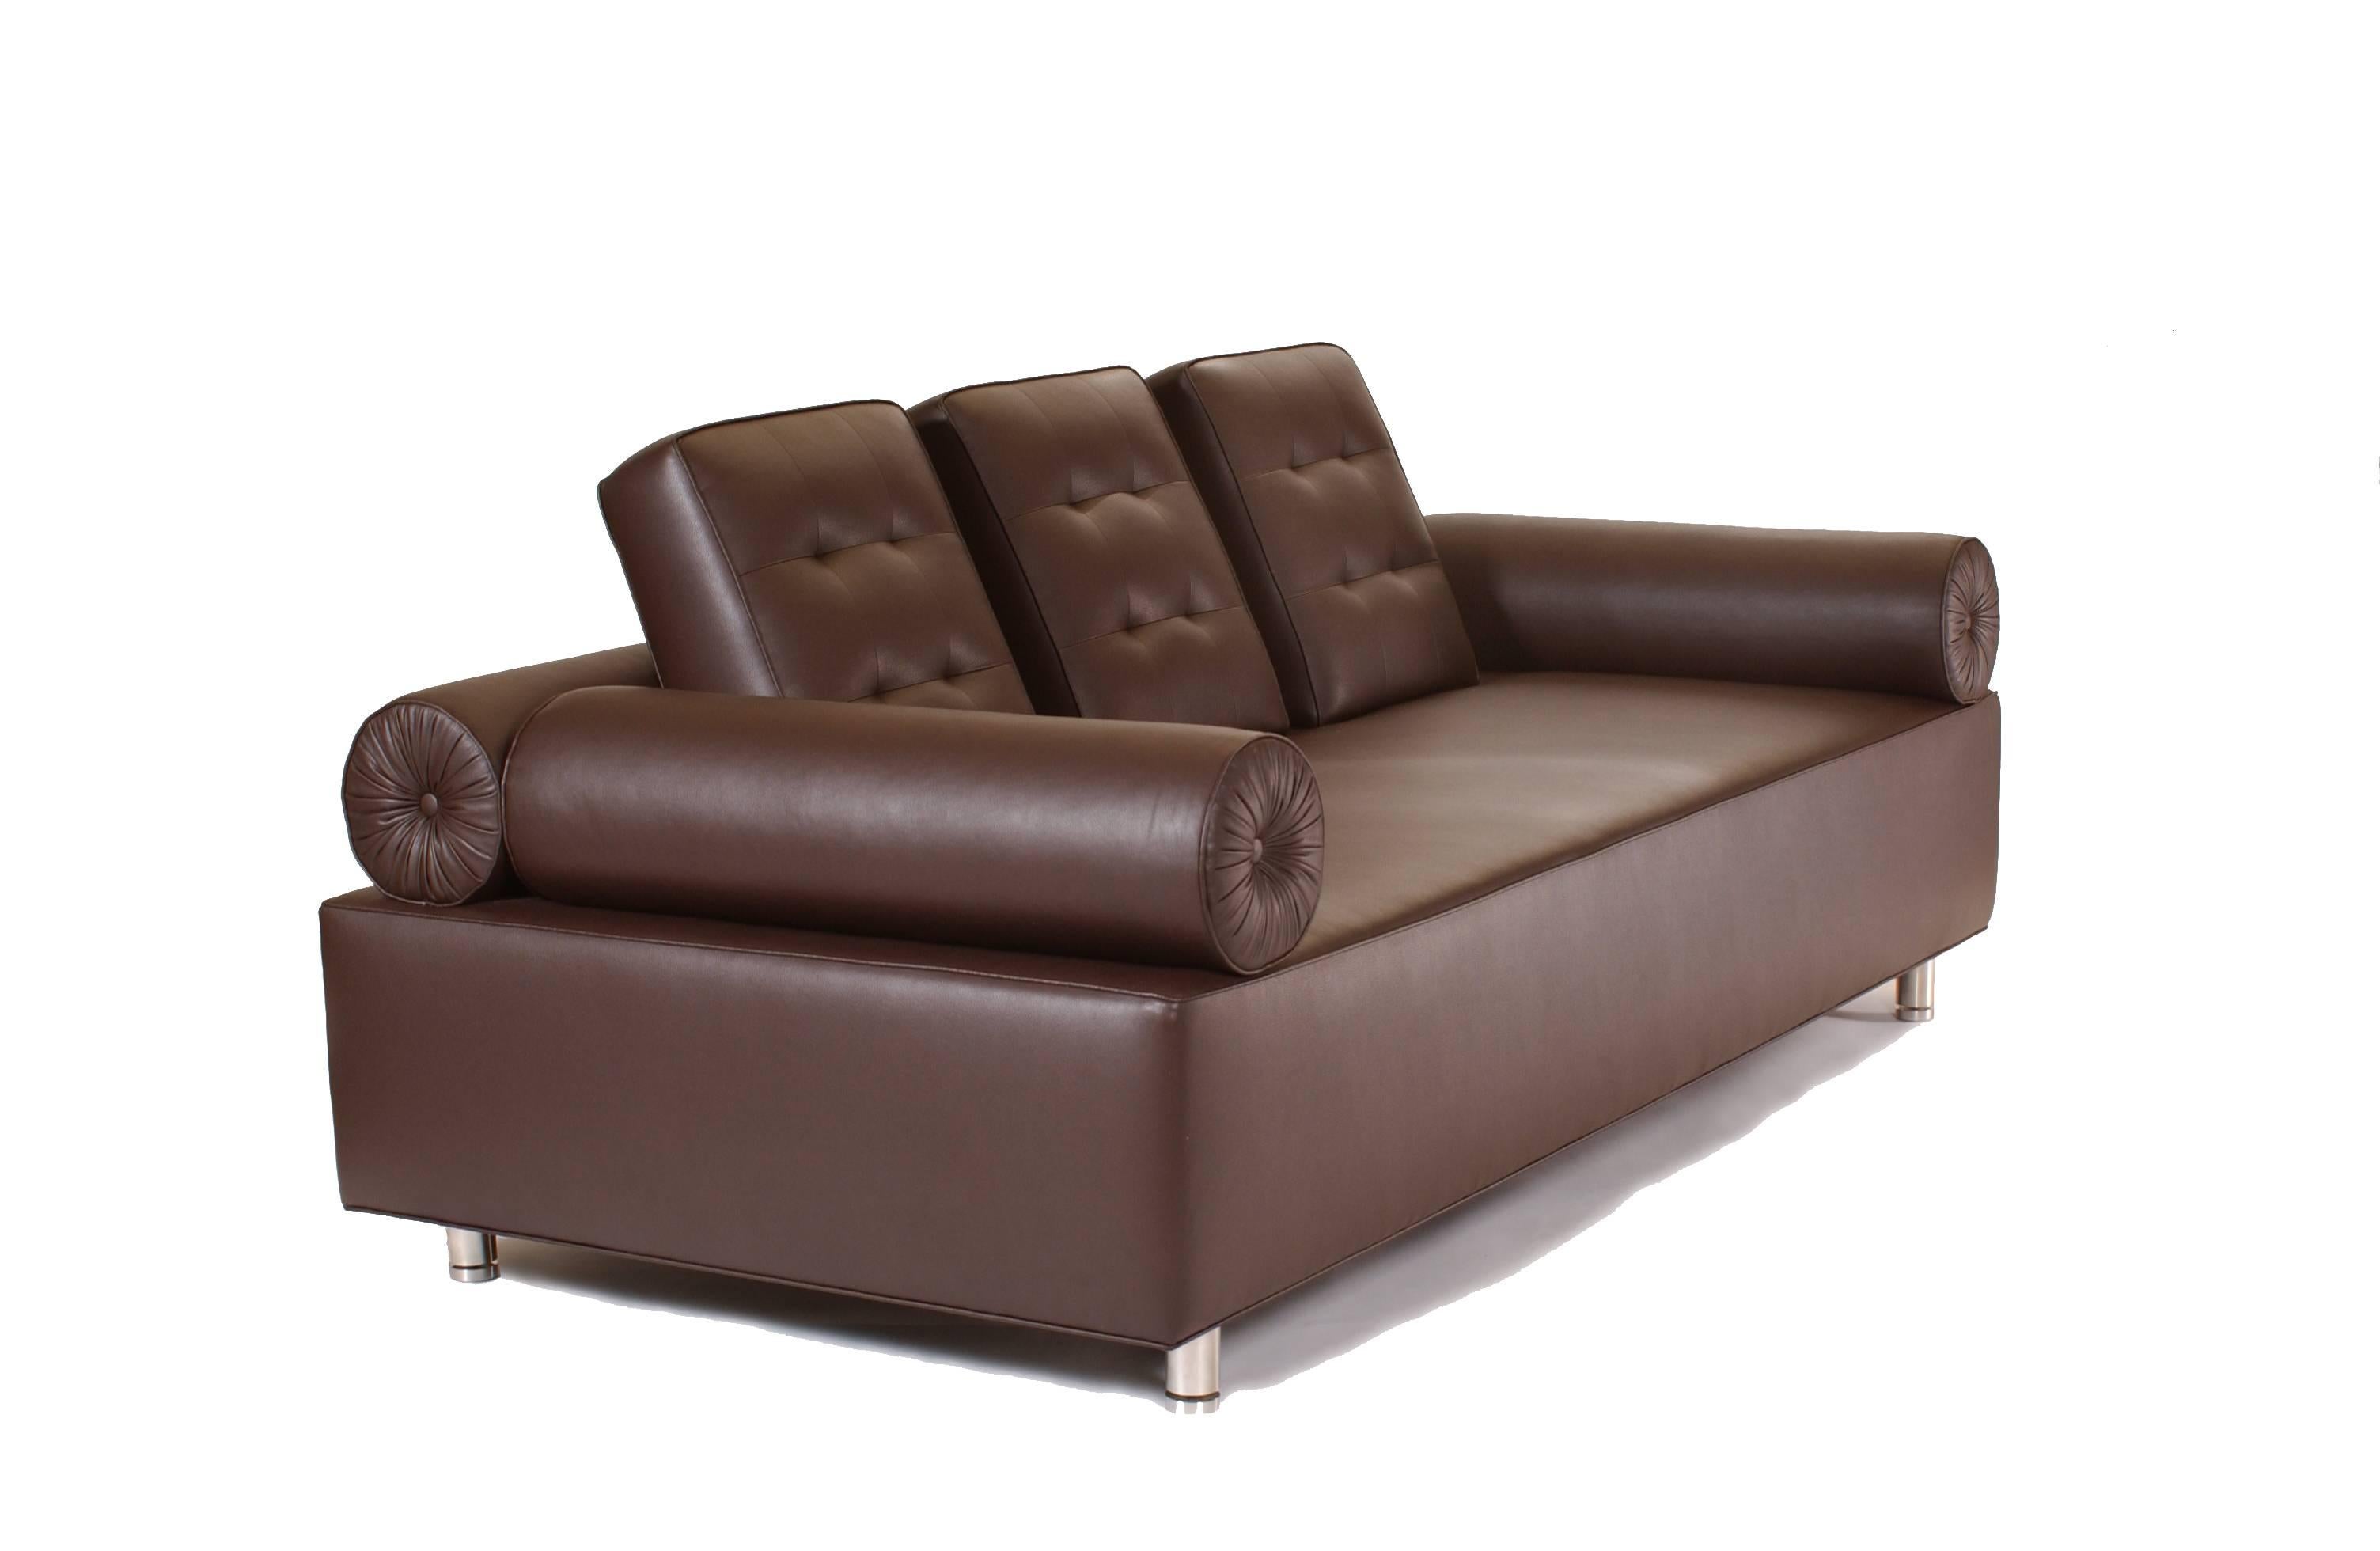 The playful Brooklyn street sofa reflects both the youthful energy and diversity of Brooklyn in its design. Unique features like the separated back cushions and bolster arms make this sofa an individual, like a true Brooklynite.